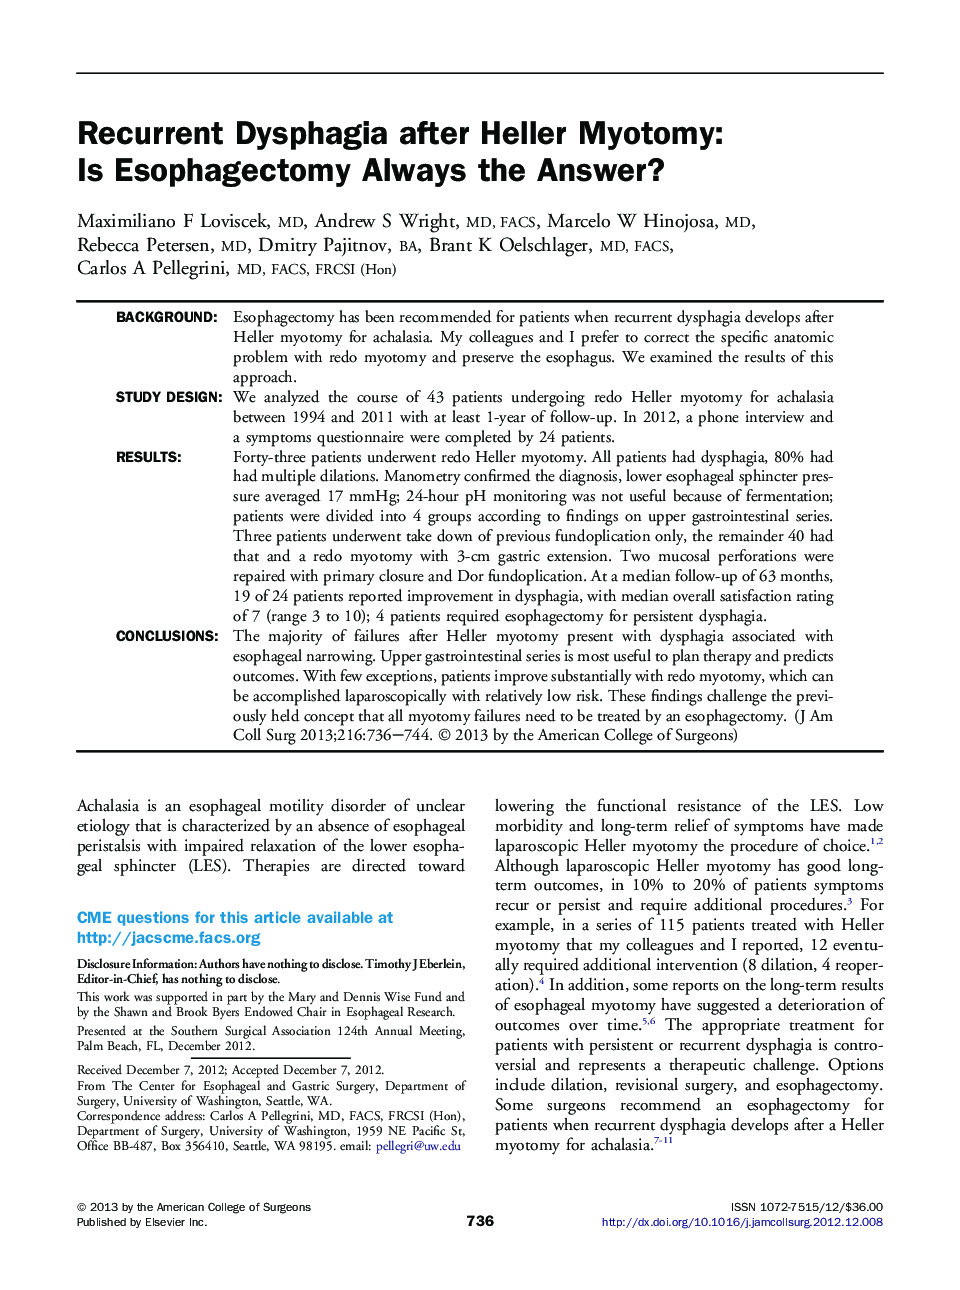 Recurrent Dysphagia after Heller Myotomy: Is Esophagectomy Always the Answer? 